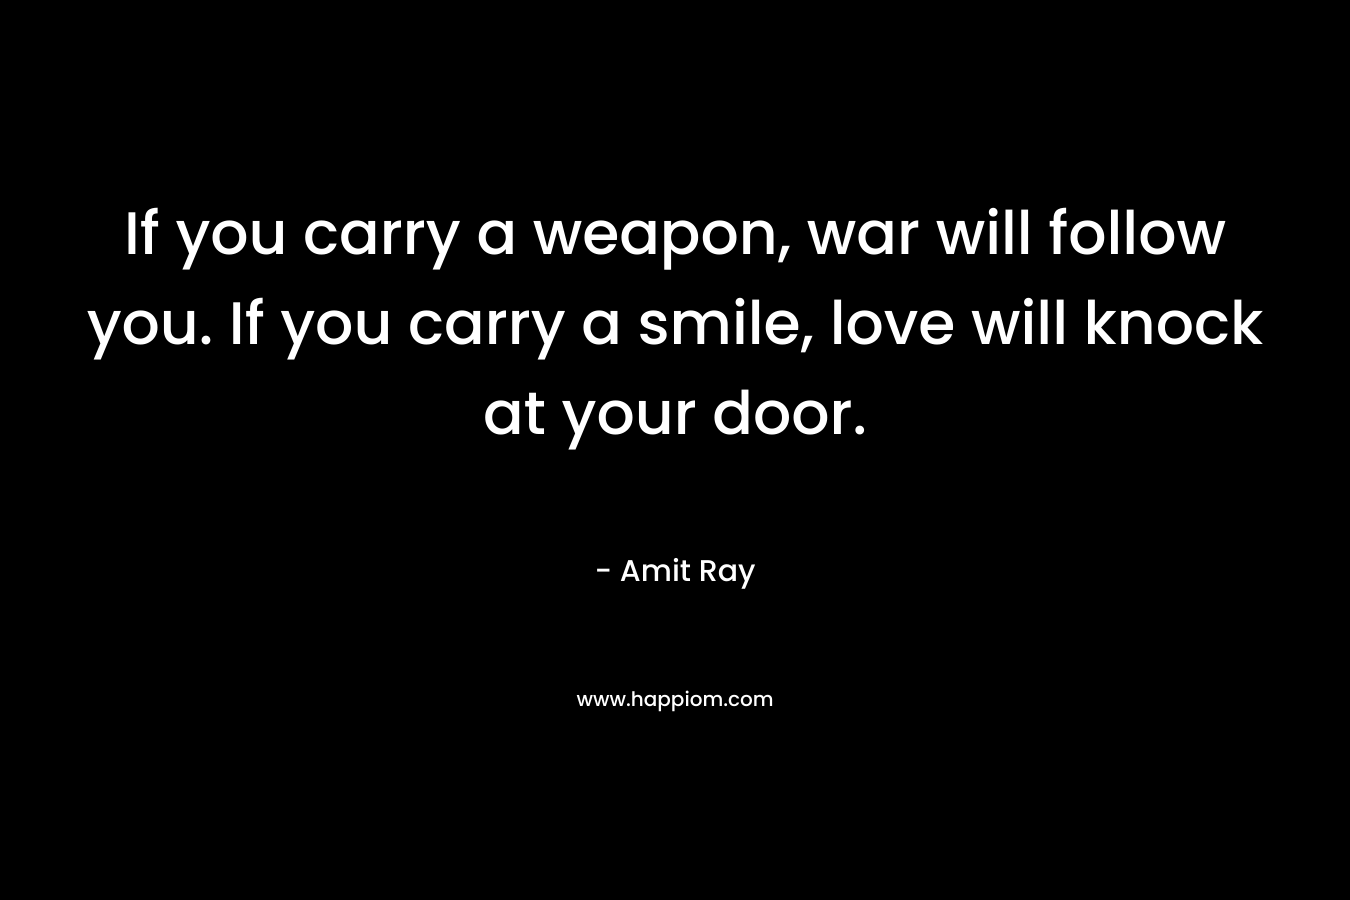 If you carry a weapon, war will follow you. If you carry a smile, love will knock at your door. – Amit Ray